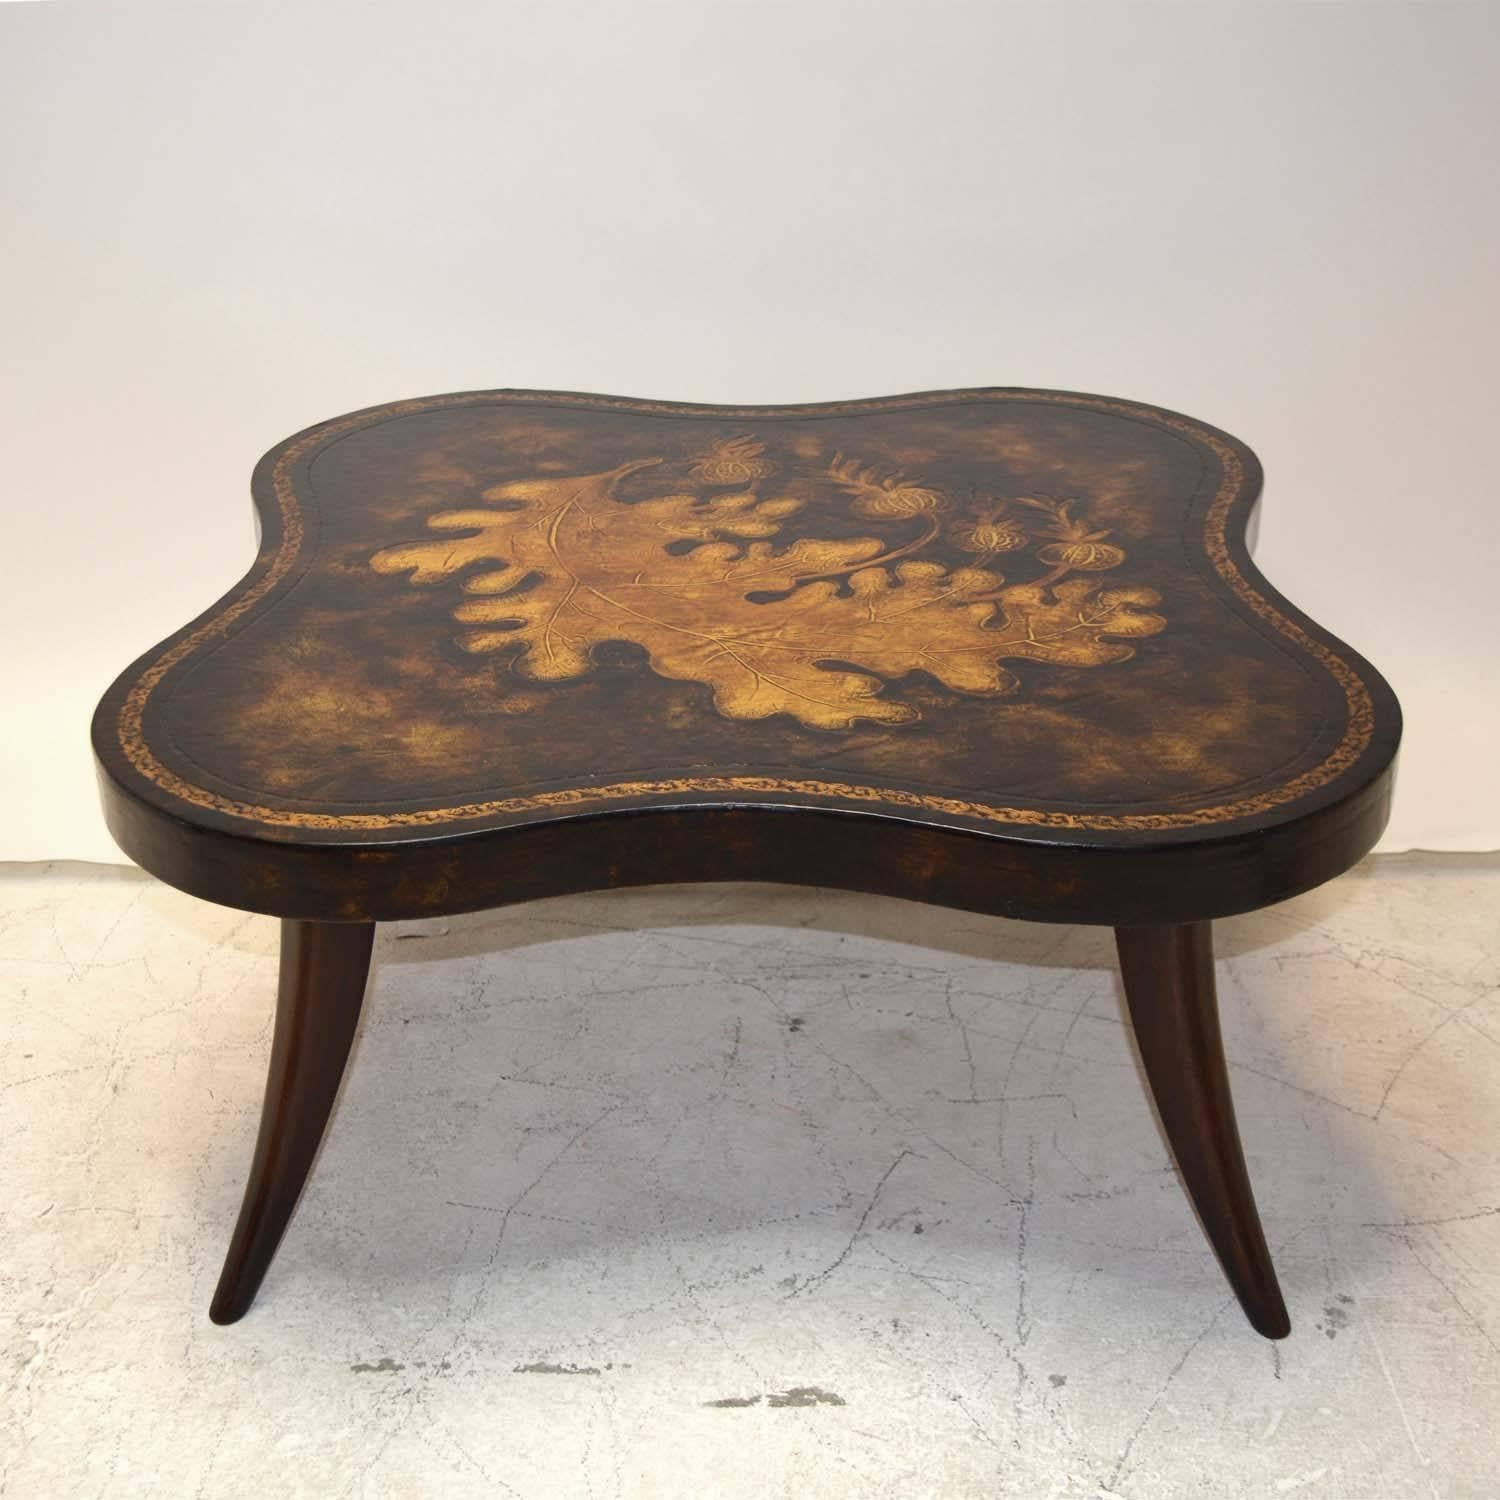 A Mid-Century Modern coffee table with incised leather top showing leaves and pomegranates, with gilt accented border, on saber legs. In the manner of Billy Haines and Paul Frankl.